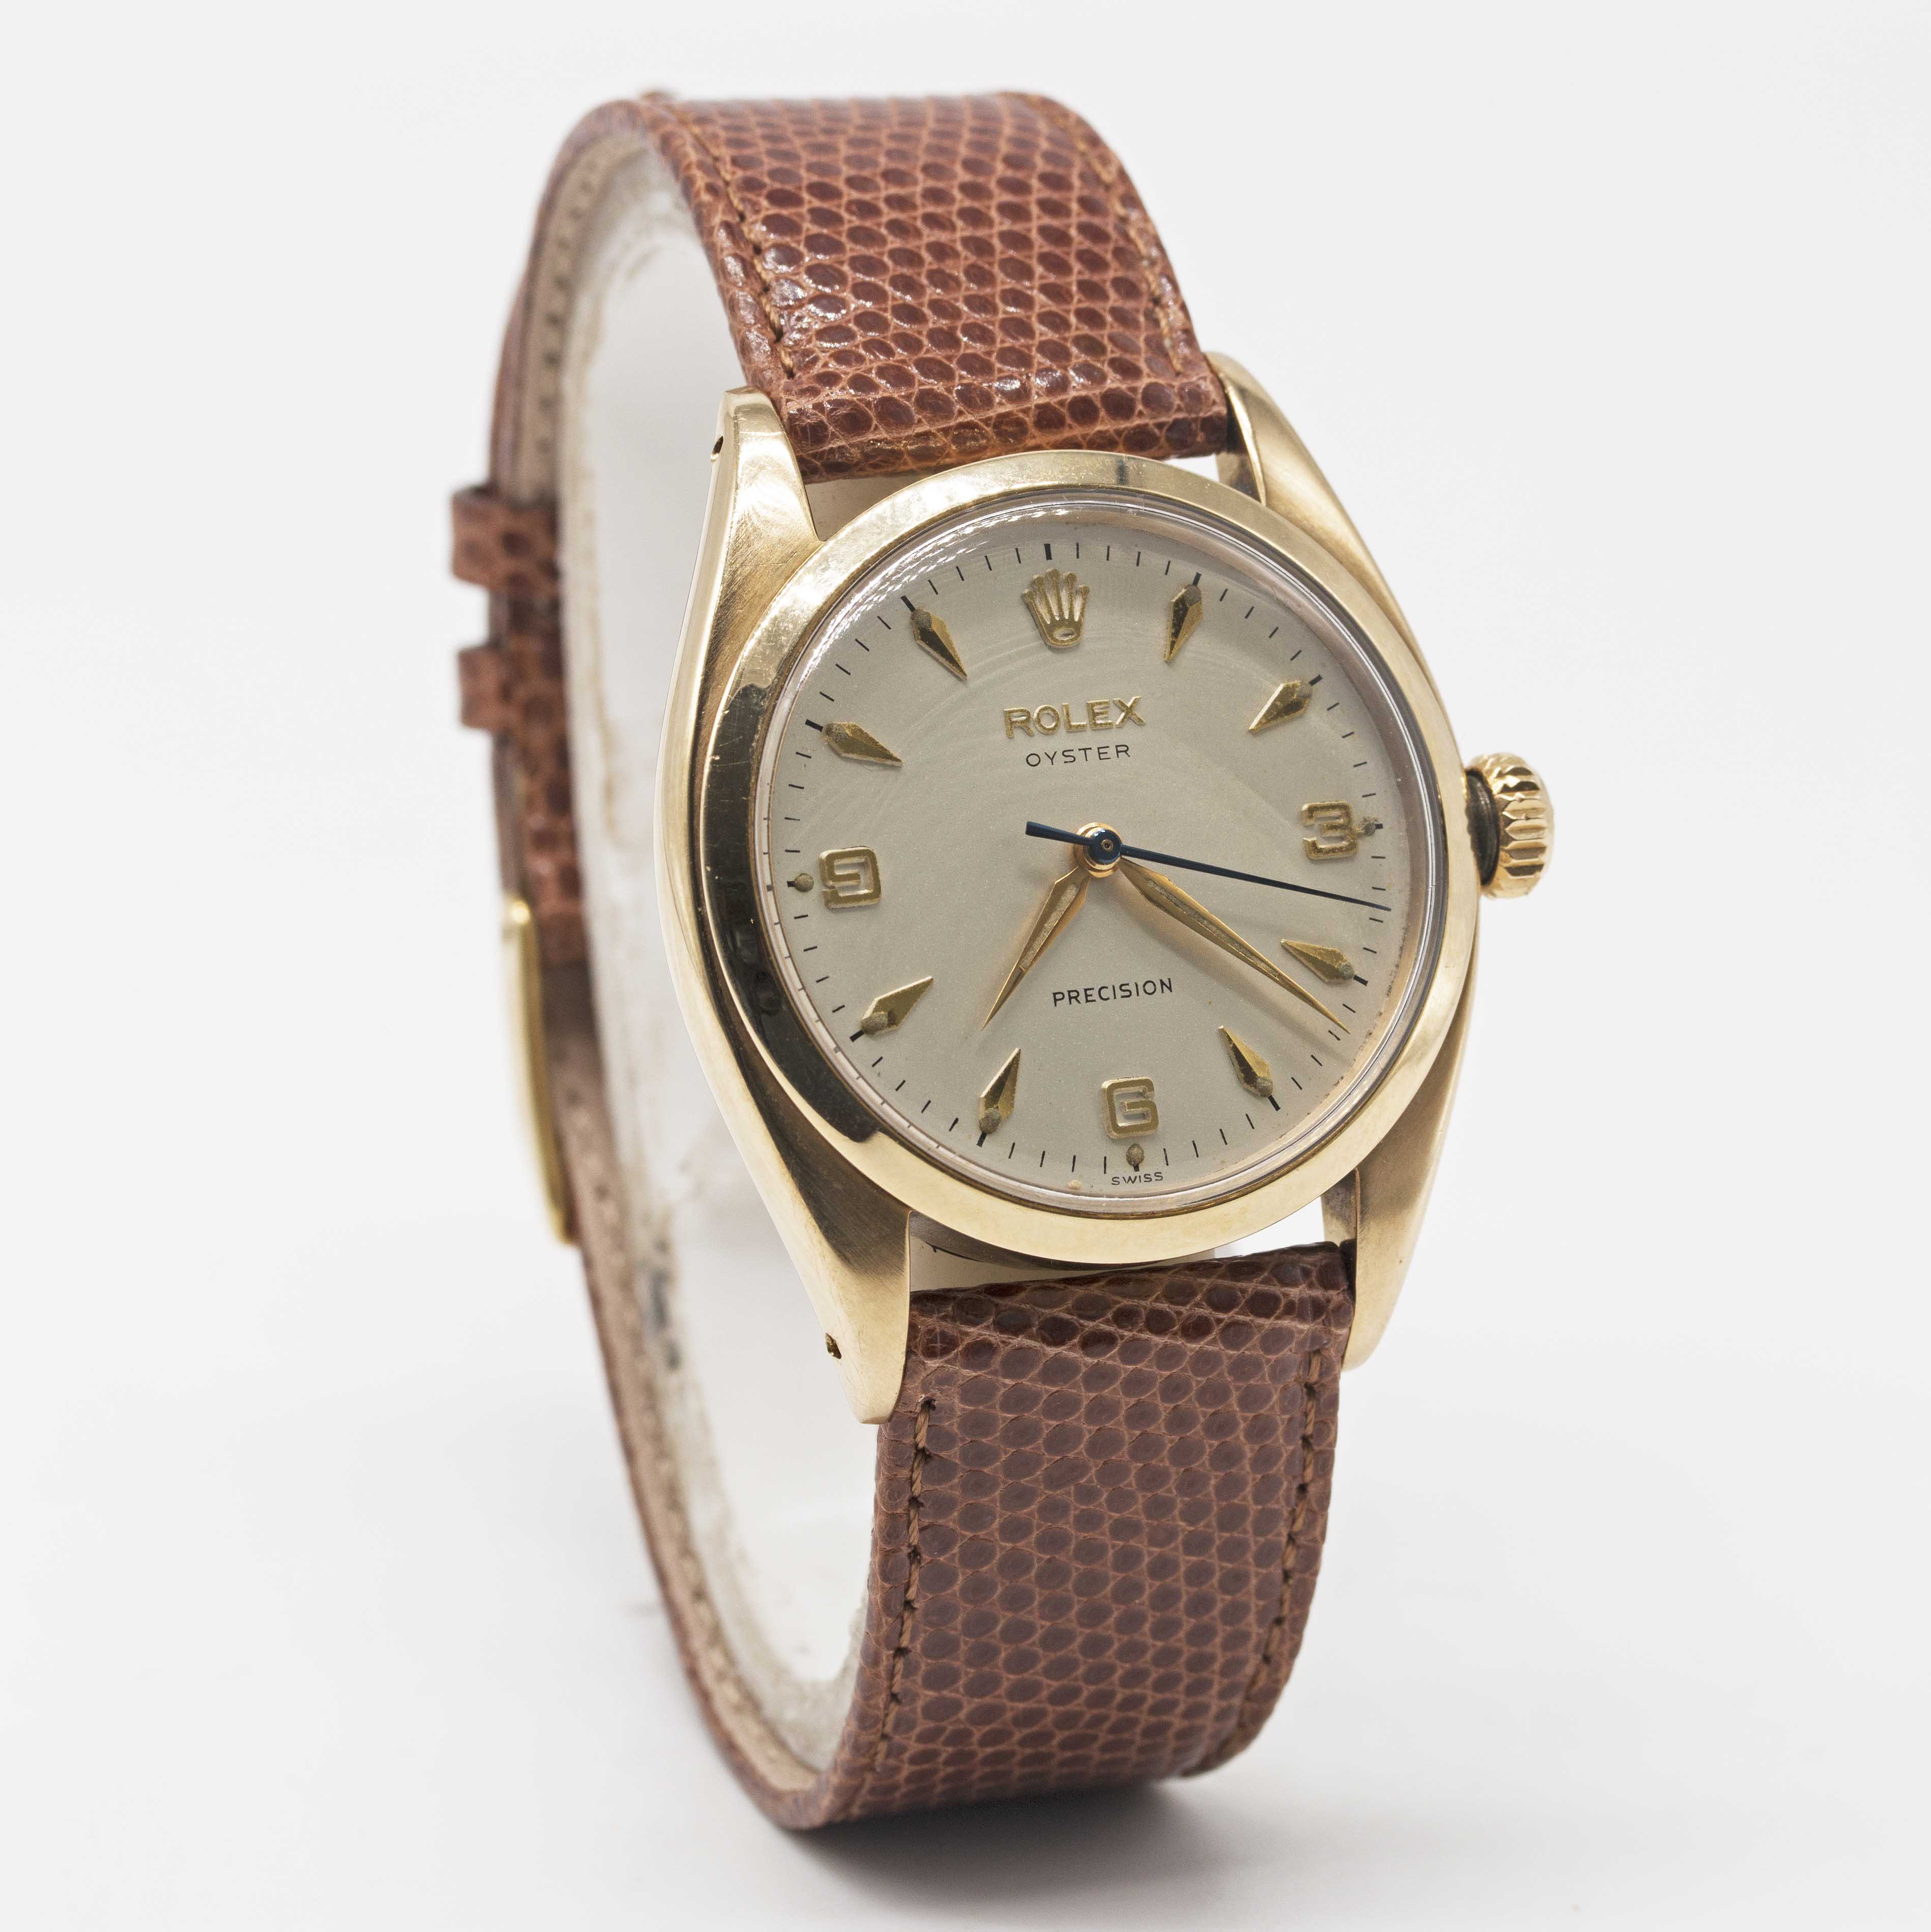 A GENTLEMAN'S 9CT SOLID GOLD ROLEX OYSTER PRECISION WRIST WATCH CIRCA 1959, REF. 6426 WITH 3-6-9 " - Image 4 of 8